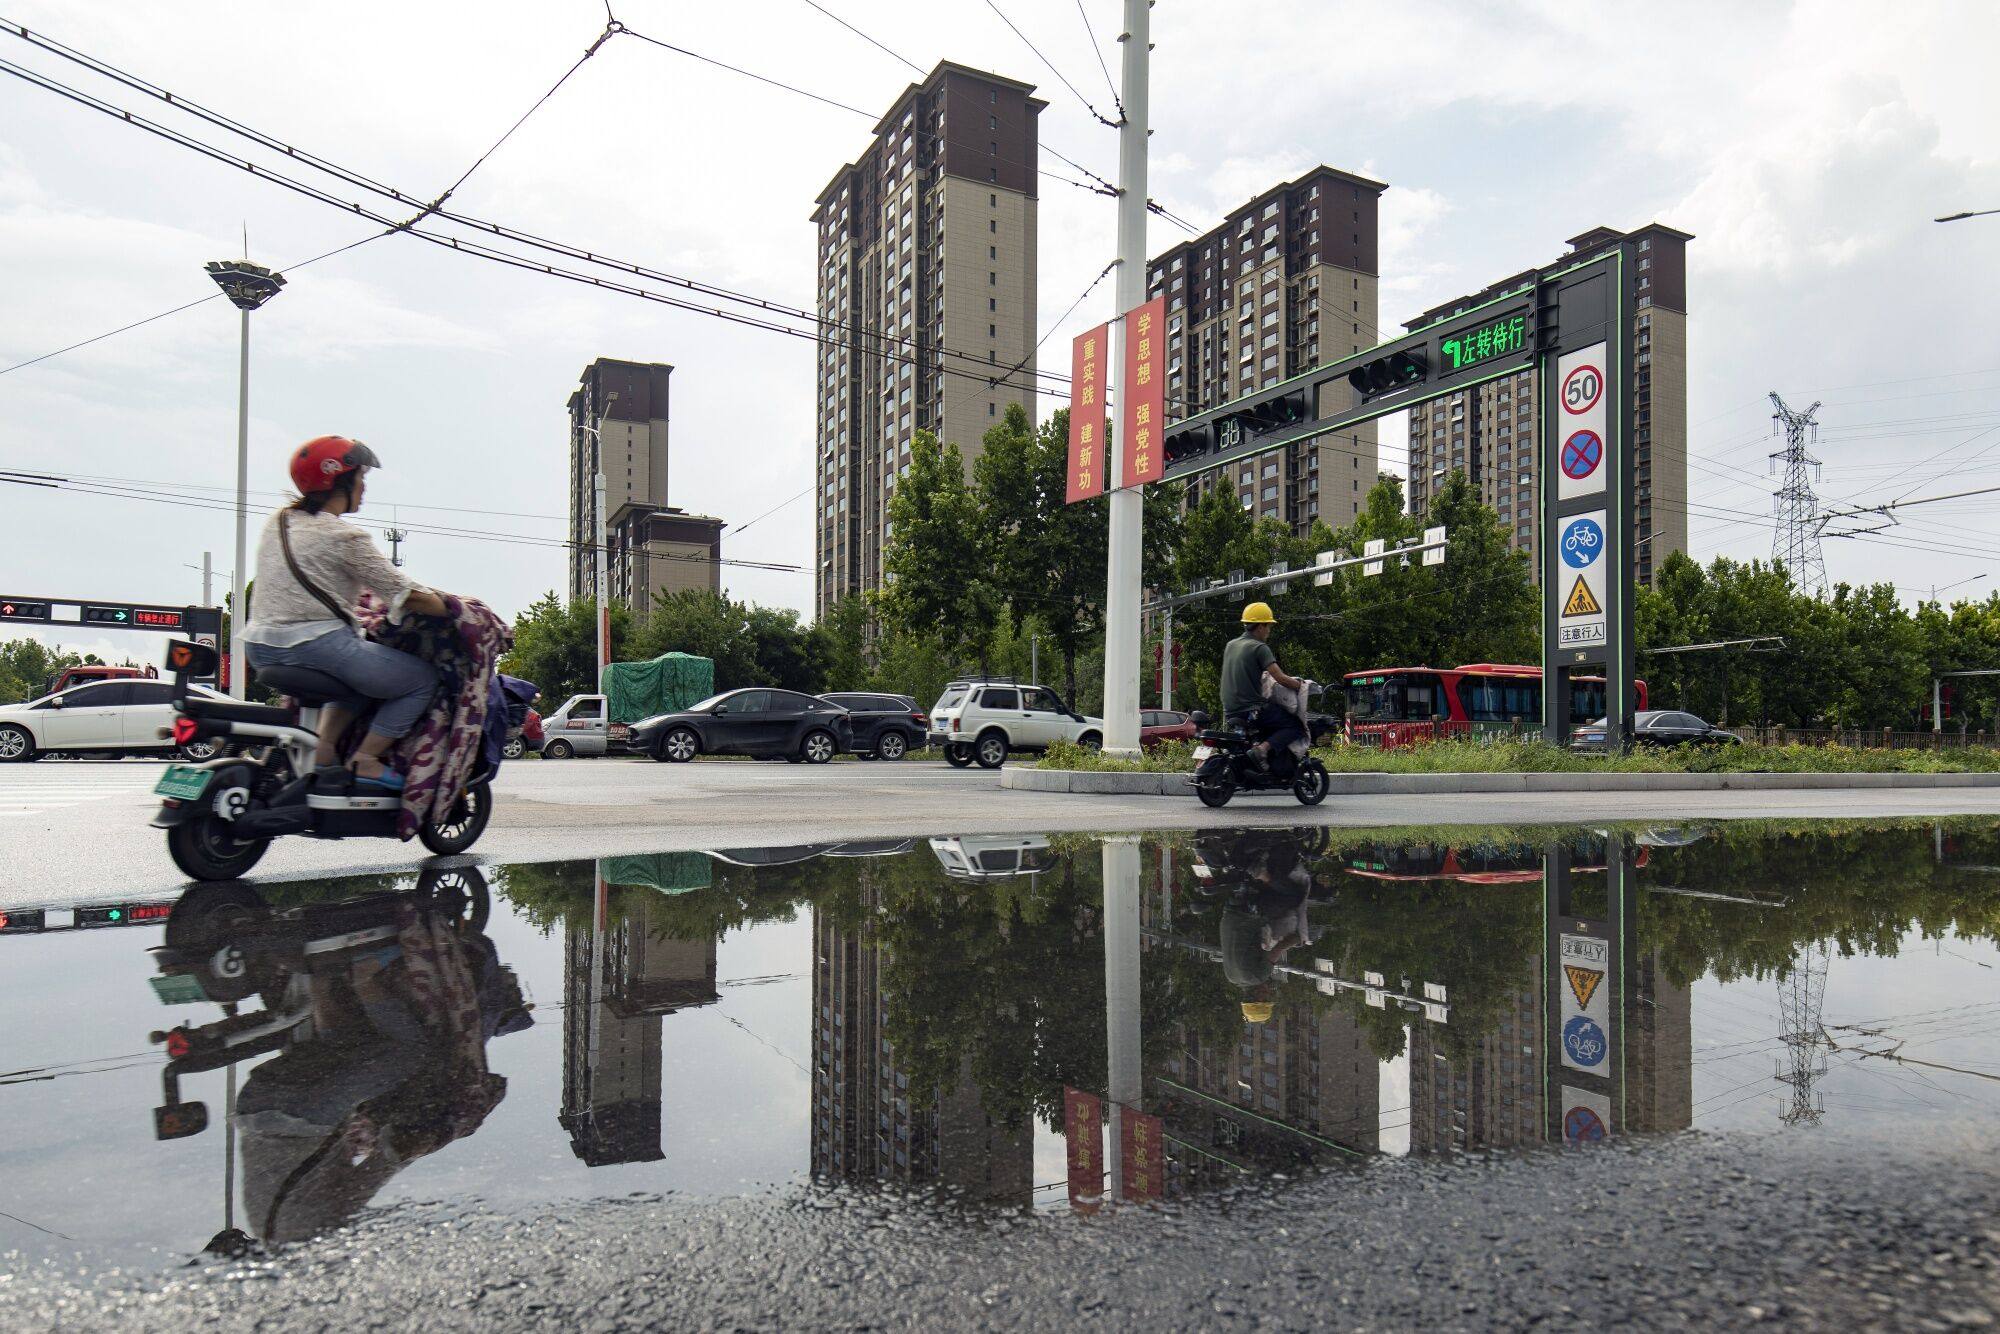 Moped riders pass residential buildings developed by Country Garden Holdings in Baoding, Hebei province, on August 1. Housing has become unaffordable for many young people in China. Photo: Bloomberg